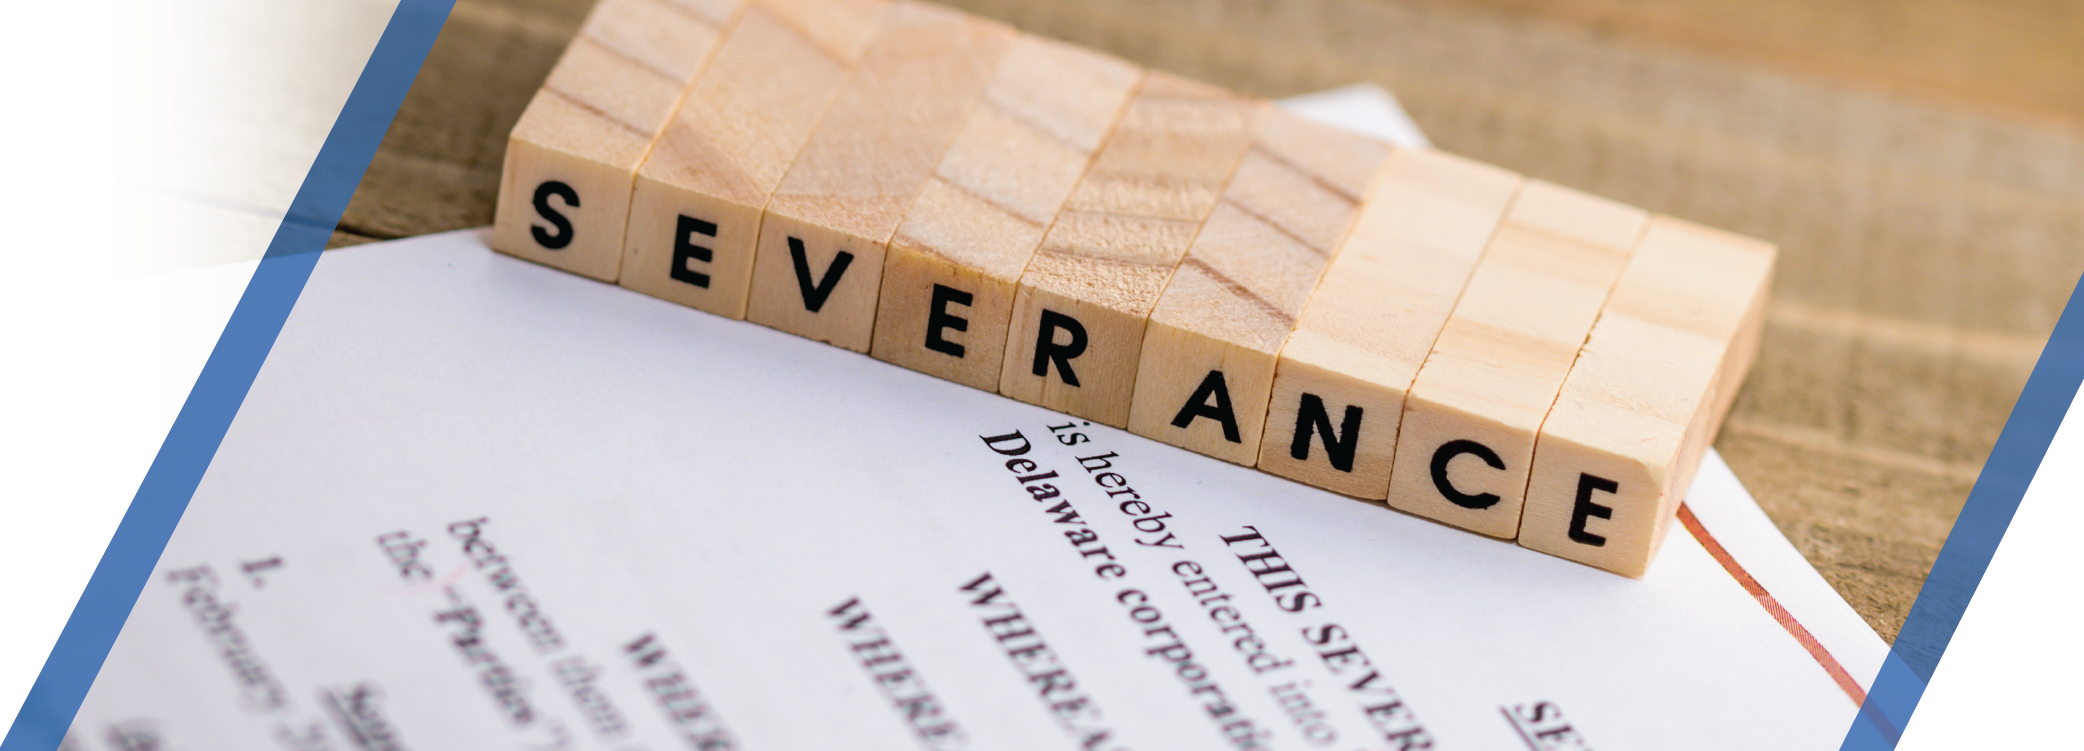 Non-Disparagement Provisions in Severance Agreements Must Be Narrowly-Tailored Under New NLRB Ruling